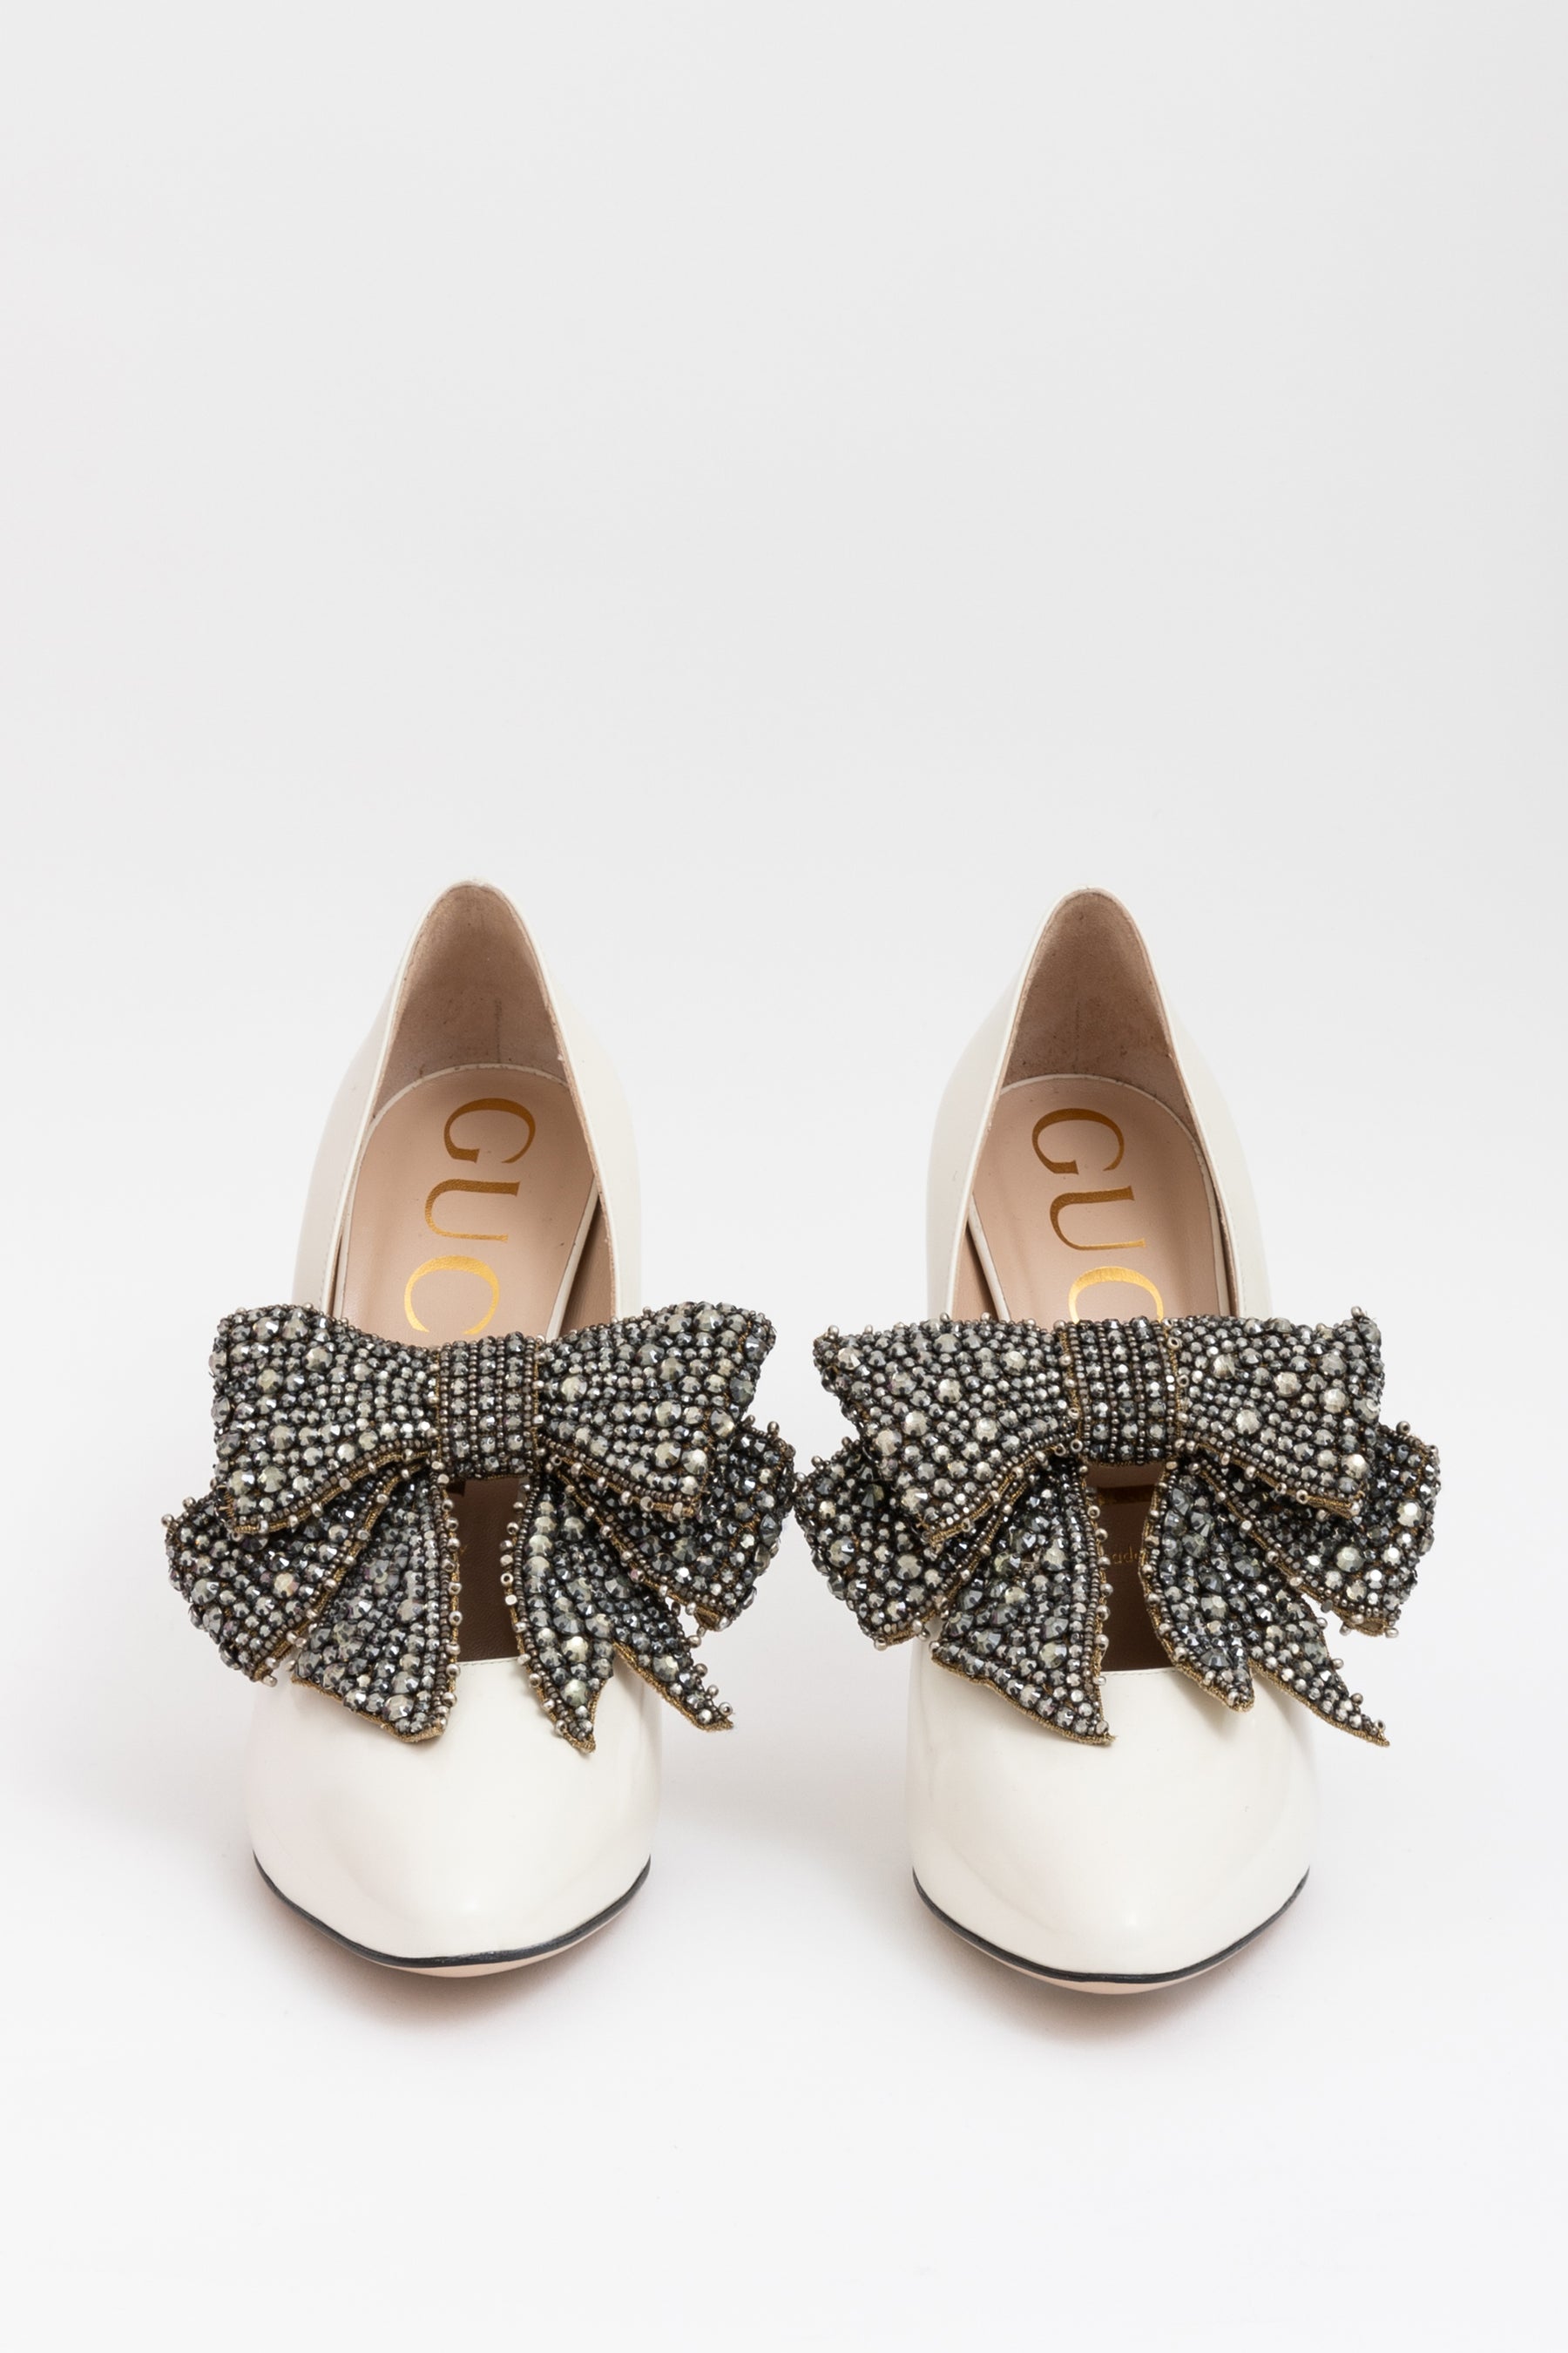 gucci-ivory-glossed-pumps-with-crystal-bow-embellishment-39-312a